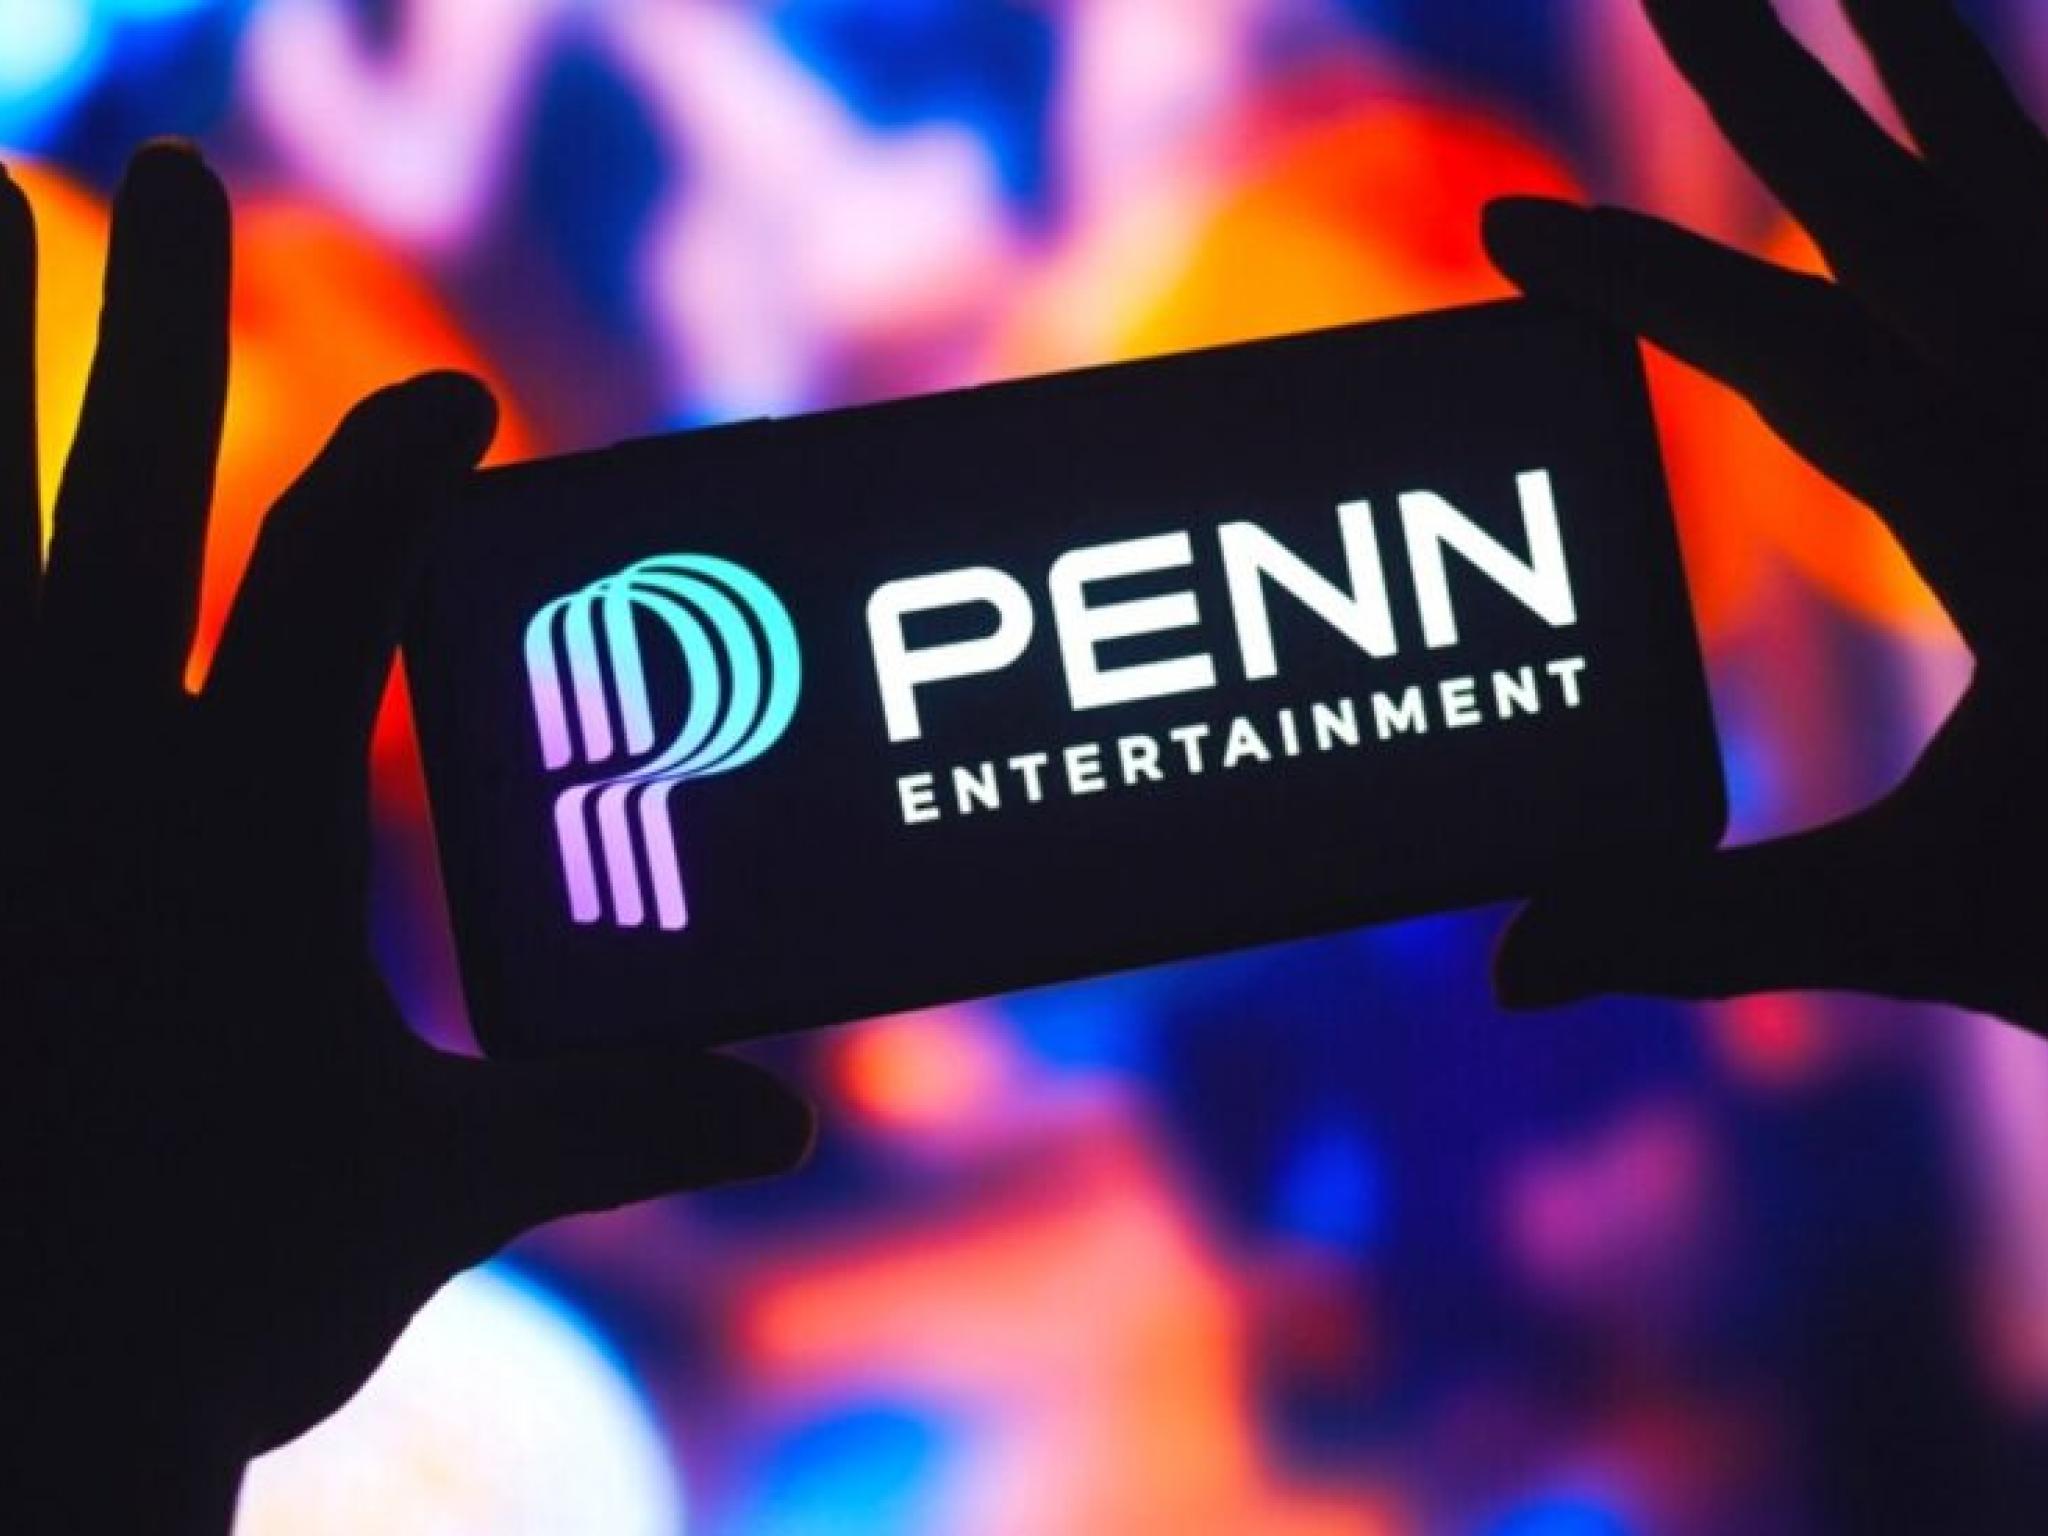  penn-entertainment-focuses-on-where-the-puck-has-been-rather-than-where-its-going-5-analysts-size-up-q1-results-sports-betting-segment 